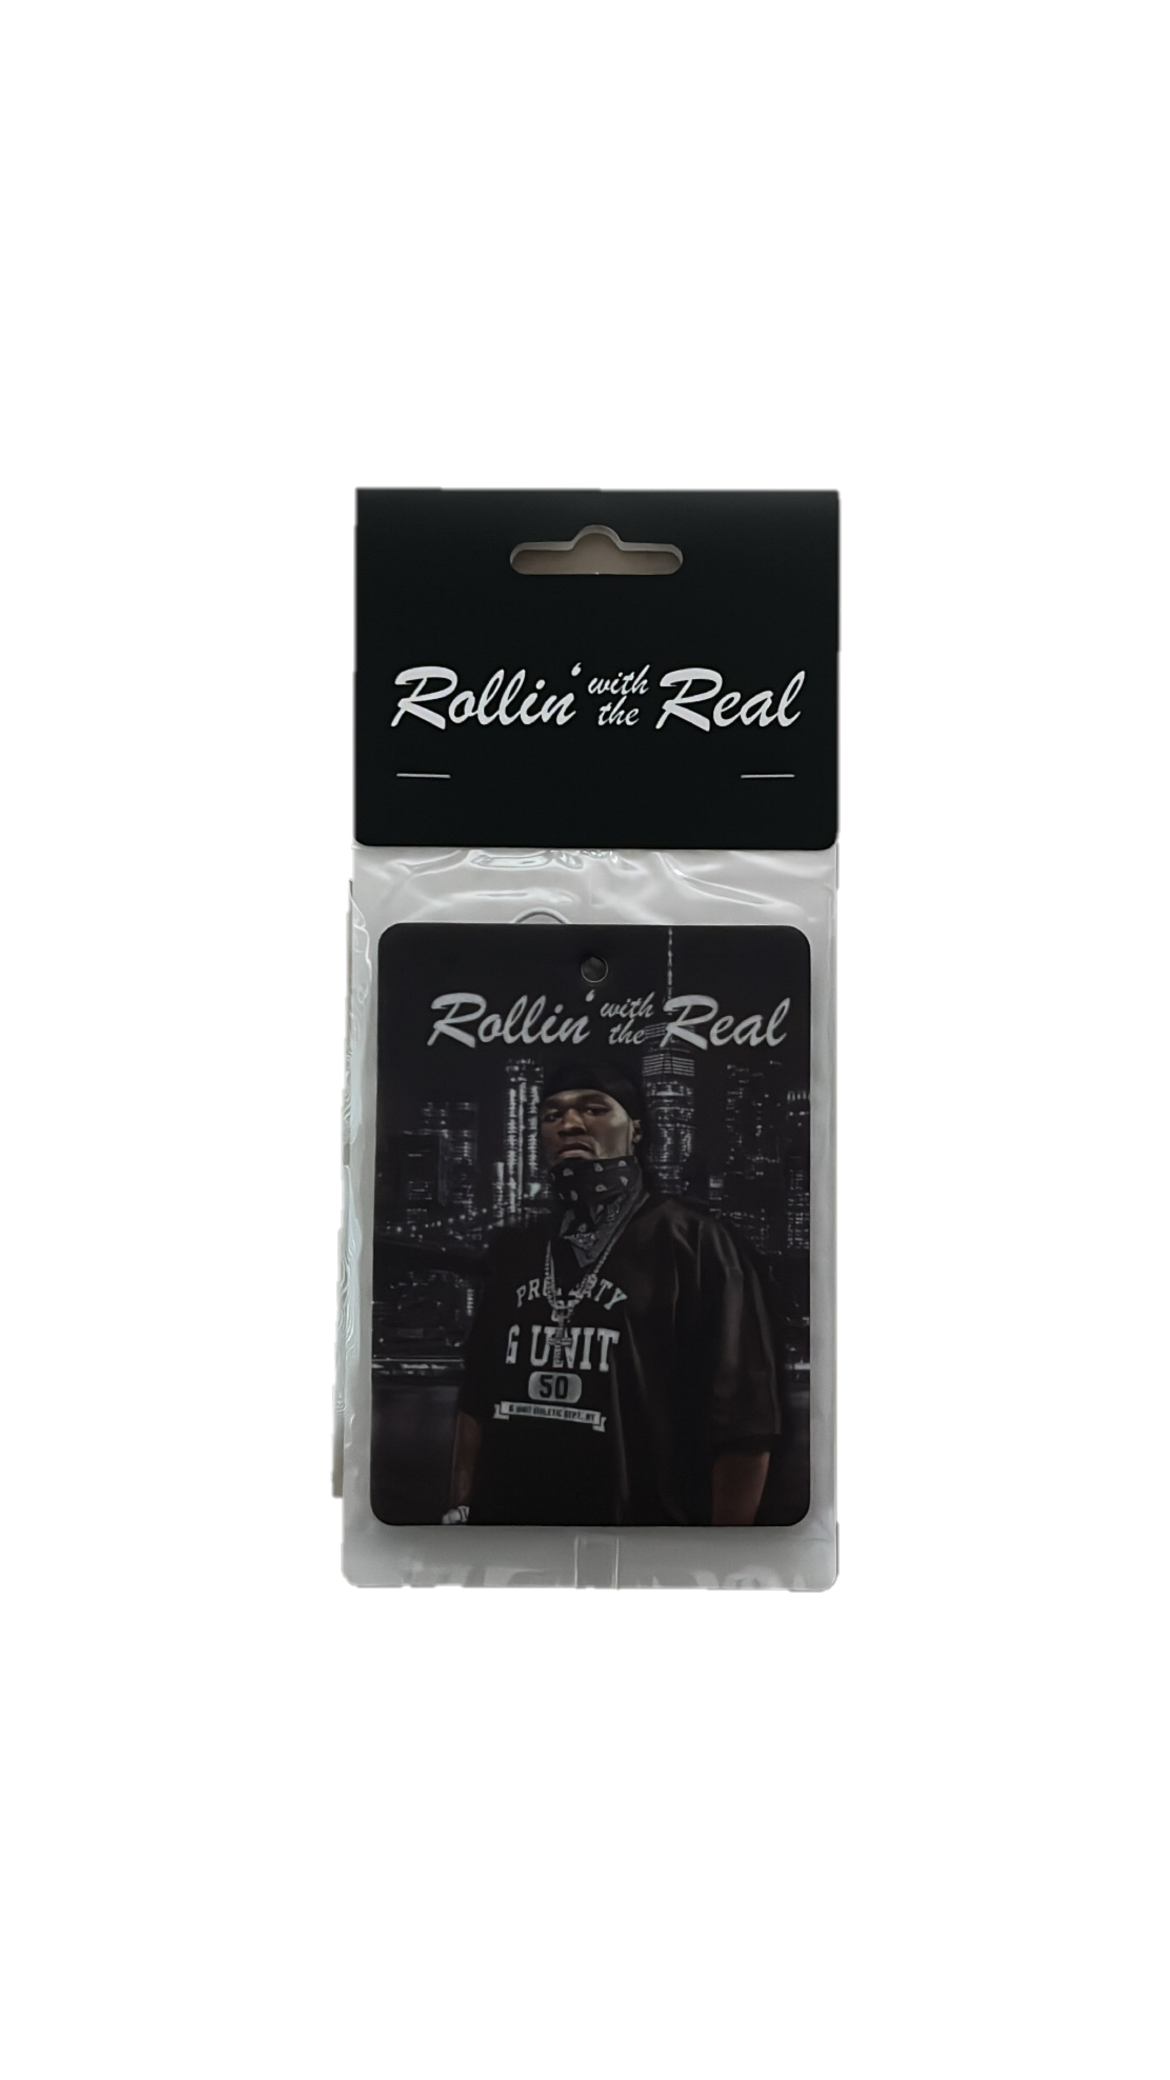 GREEN APPLE-50 CENT Air Freshener – Rollinwiththereal